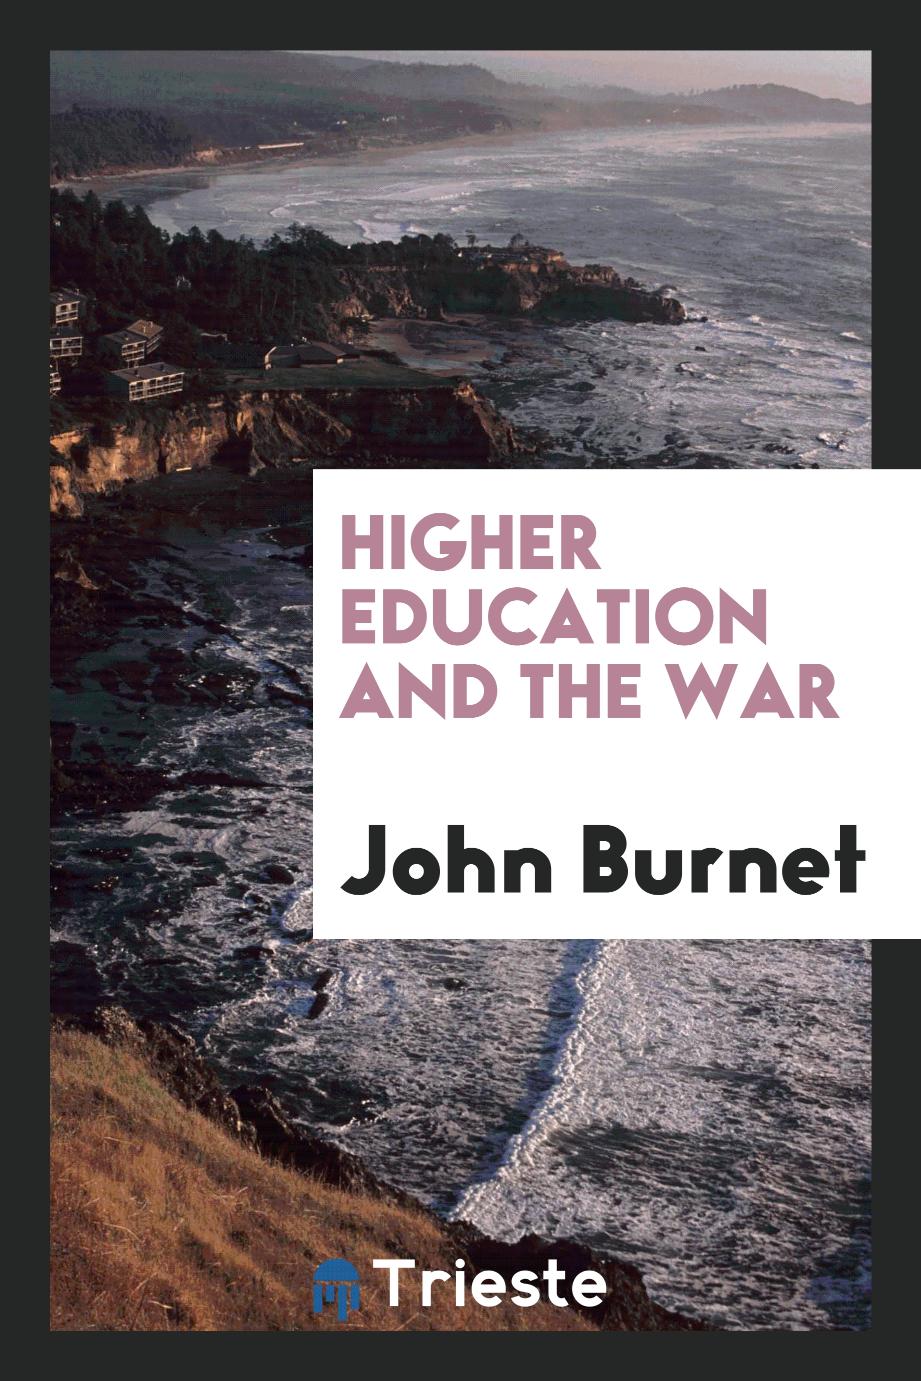 Higher education and the war